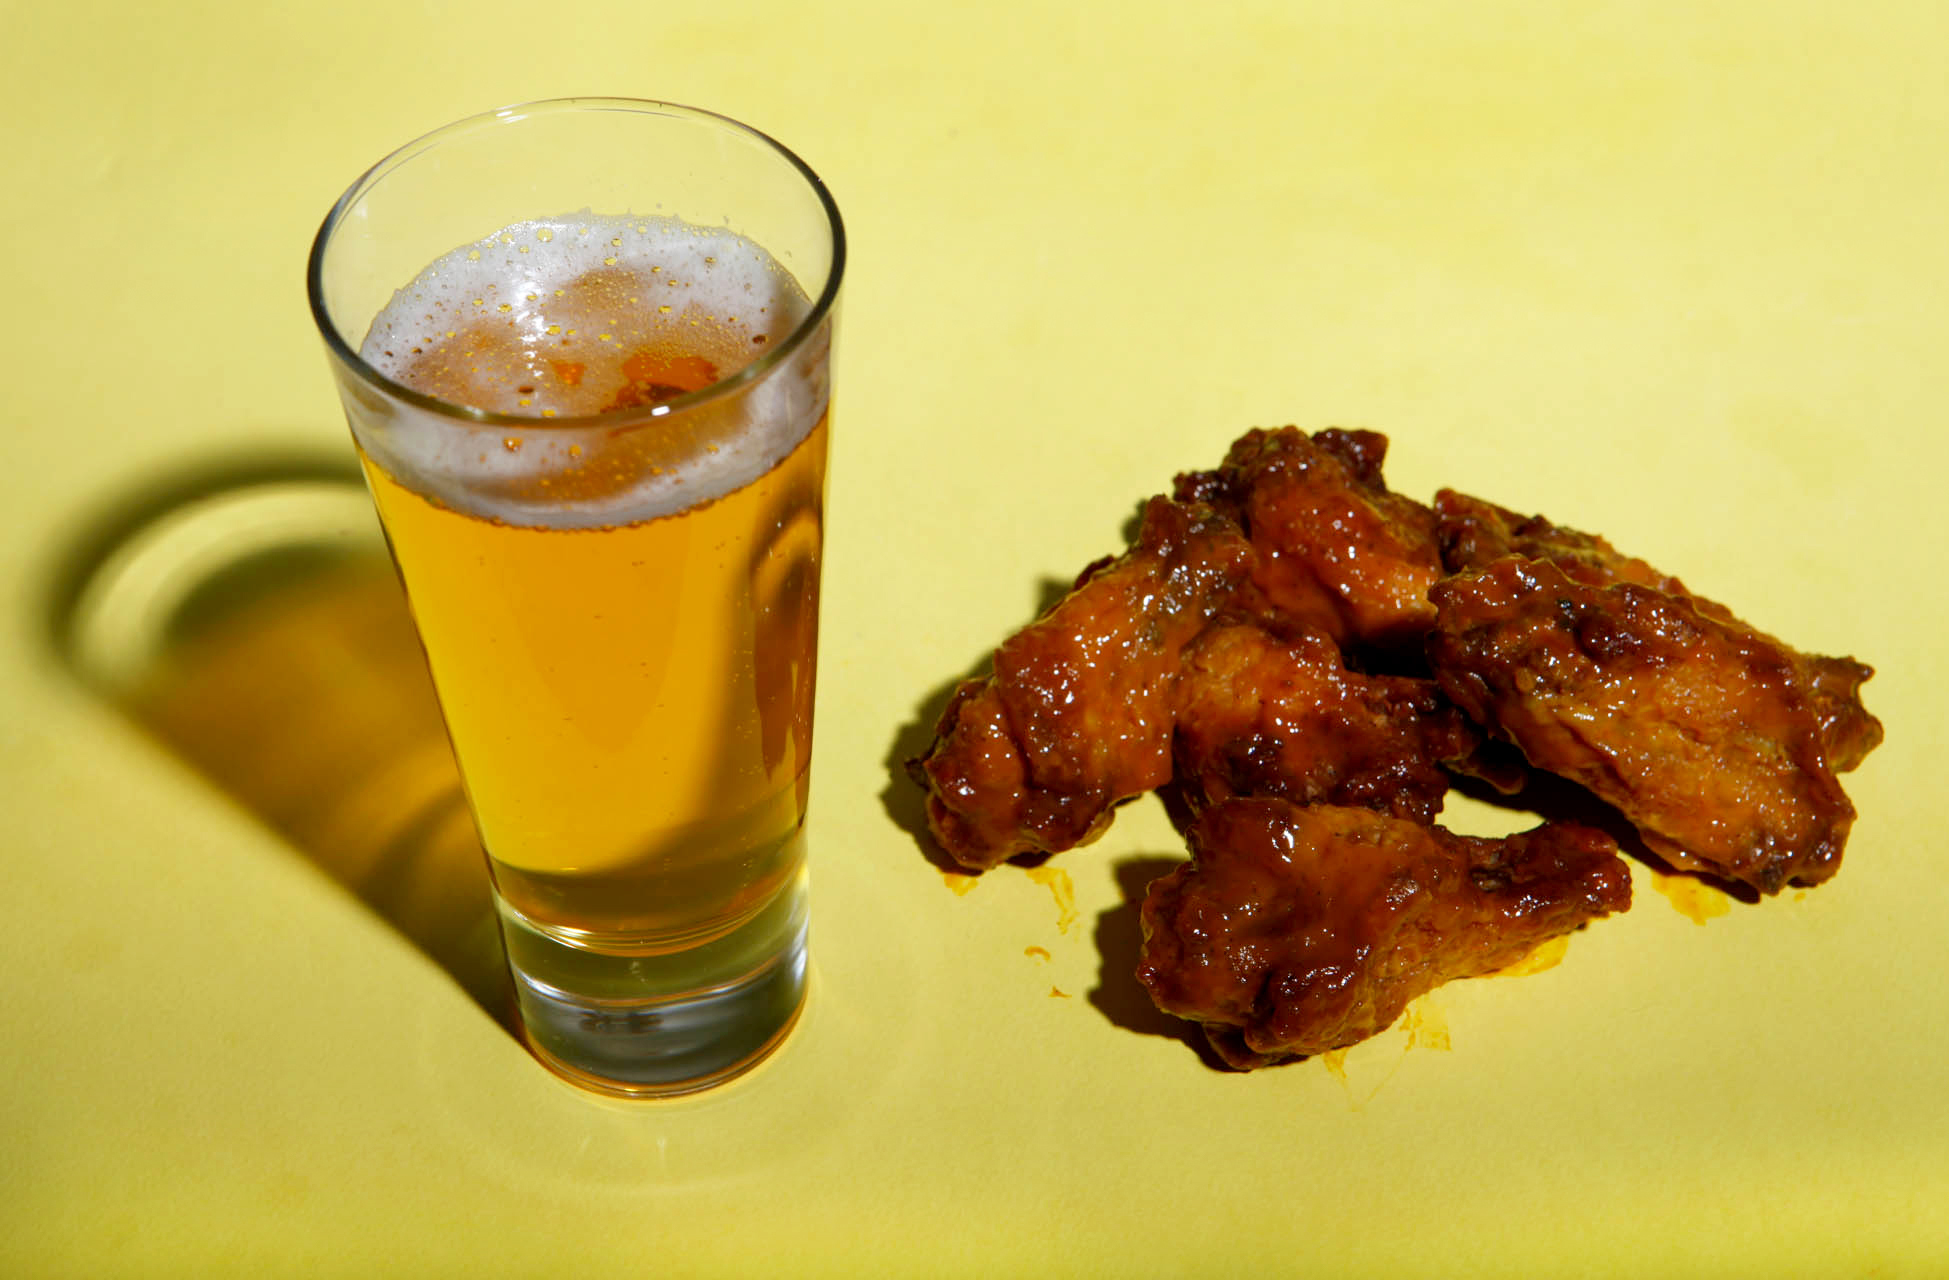 Buffalo wings paired with Mama's Little Yella Pils